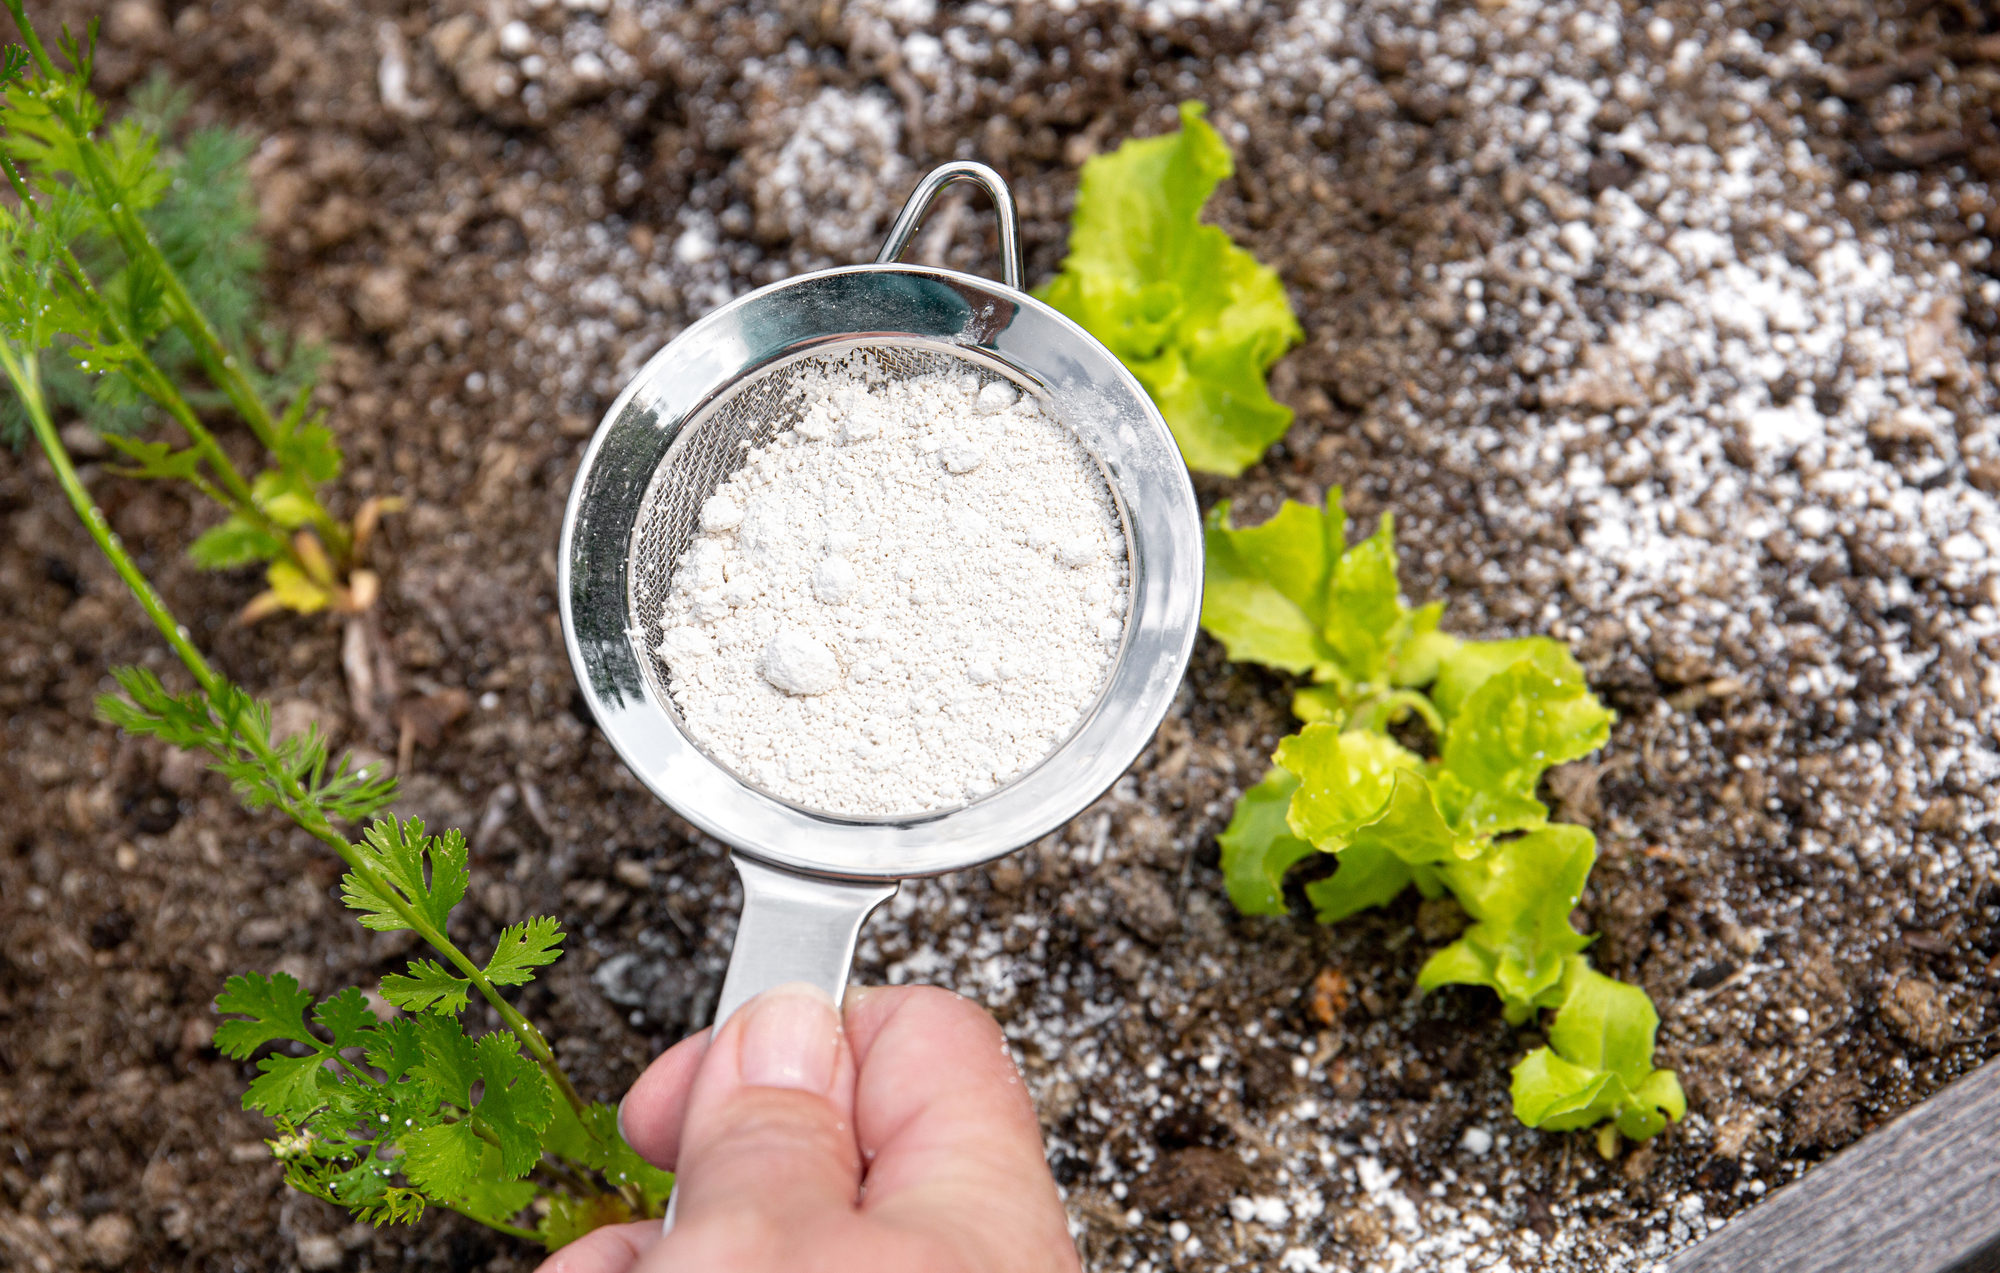 Hand uses sifter to sprinkle diatomaceous earth on a small garden plot with young plants